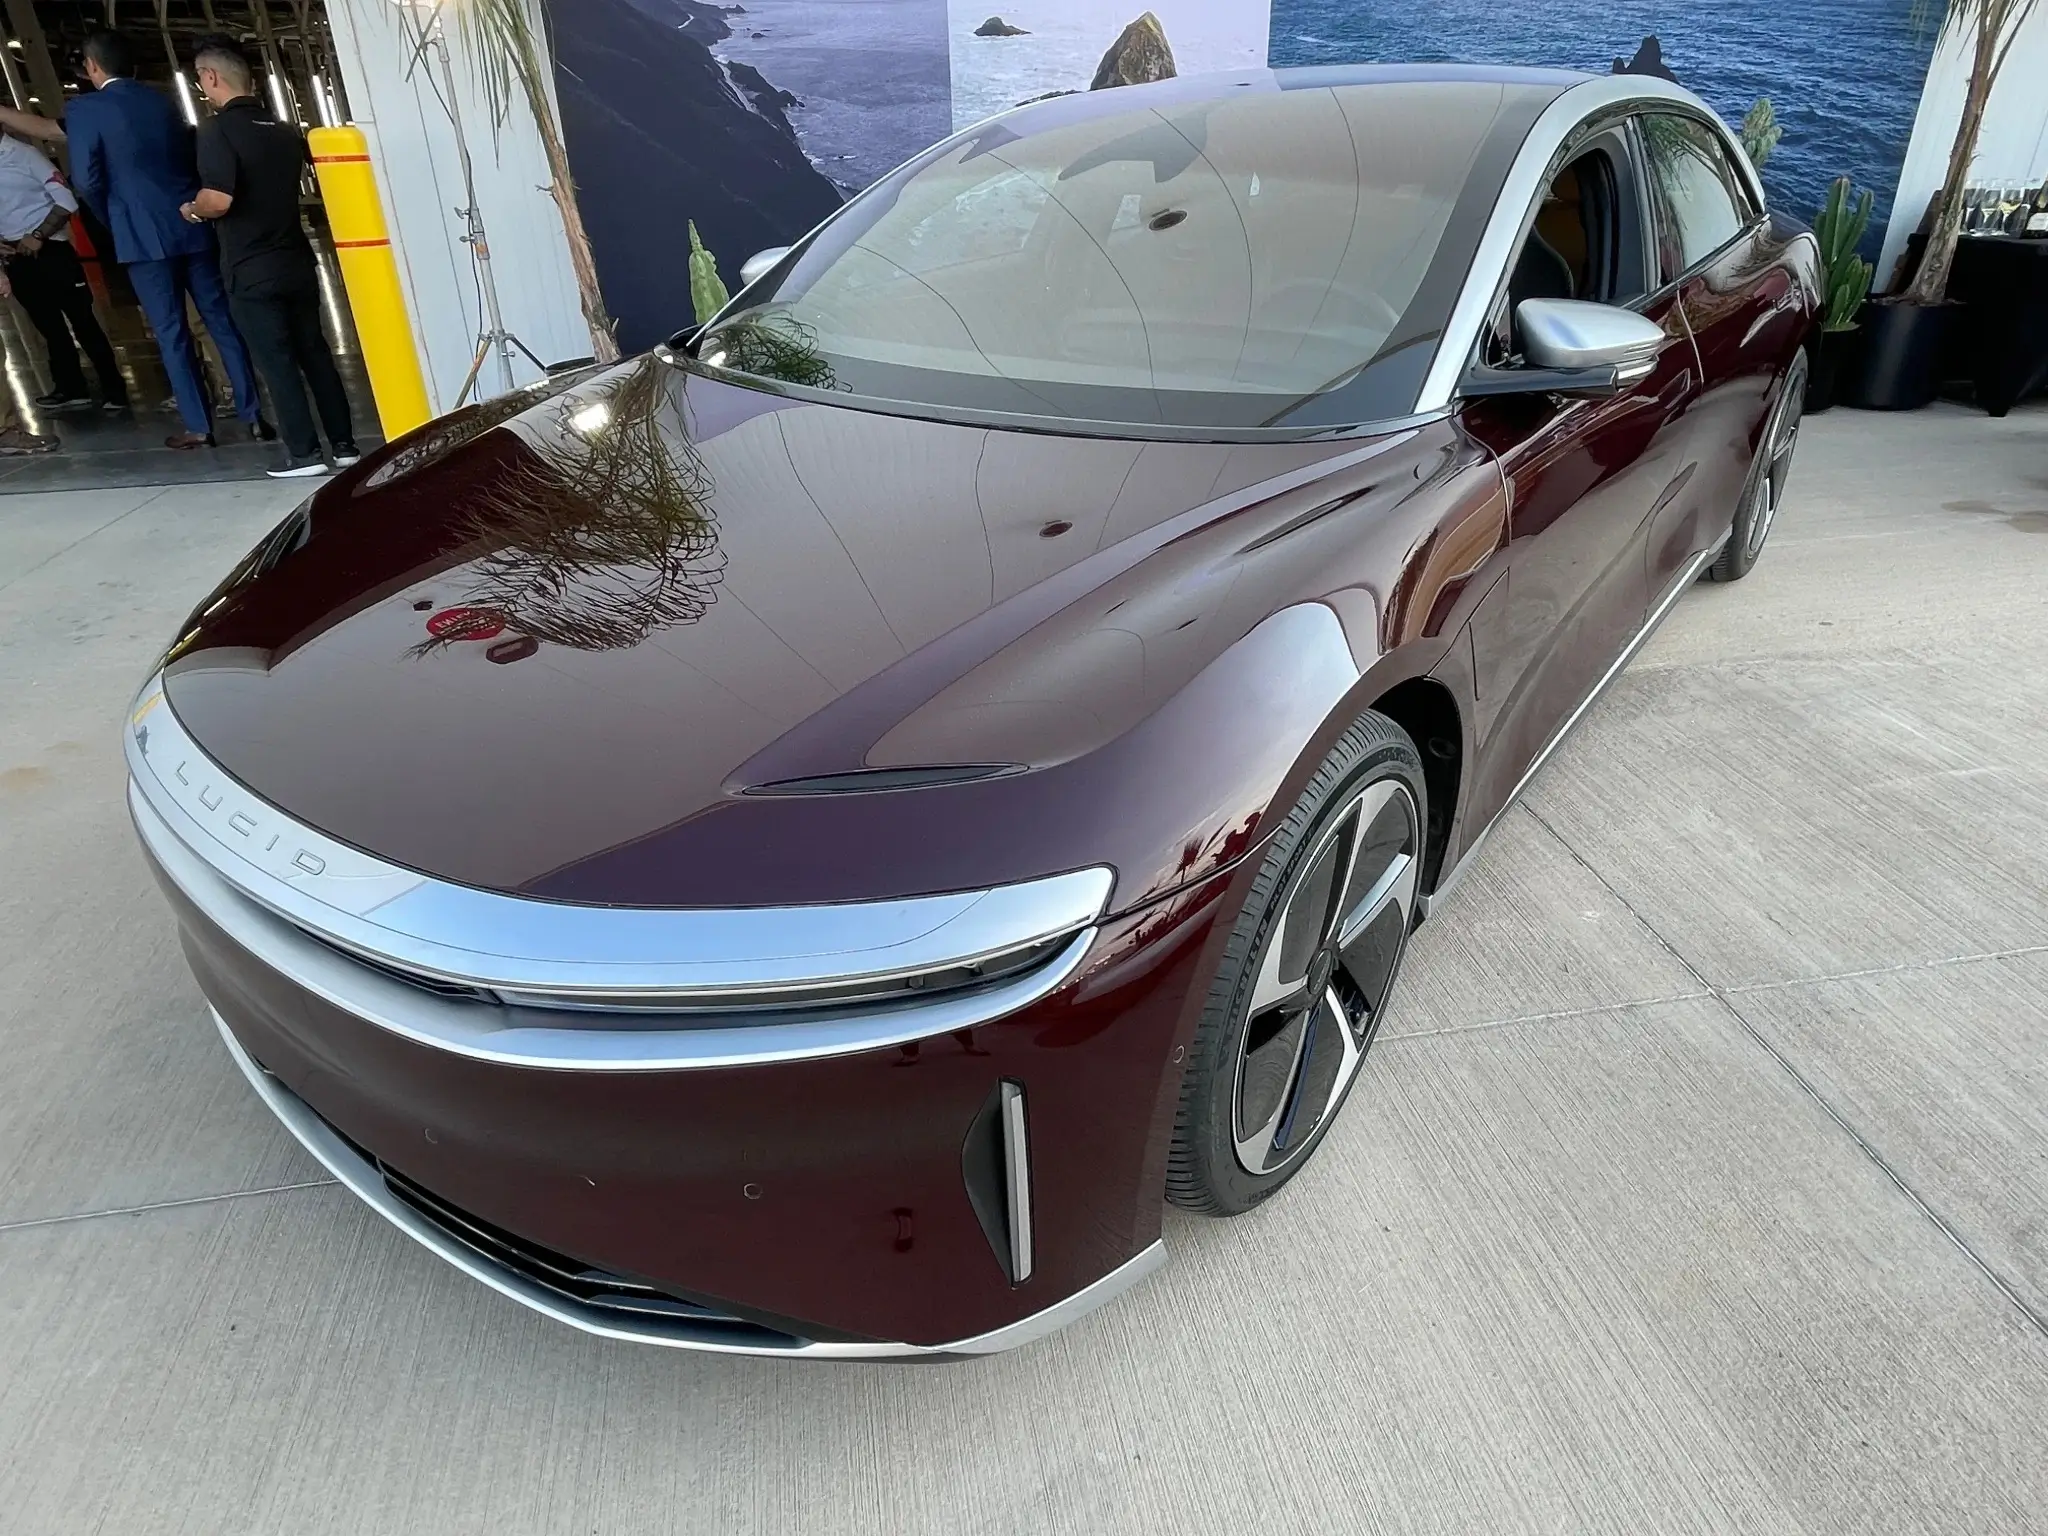 https://e-vehicleinfo.com/lucid-air-price-specifications-and-top-features/